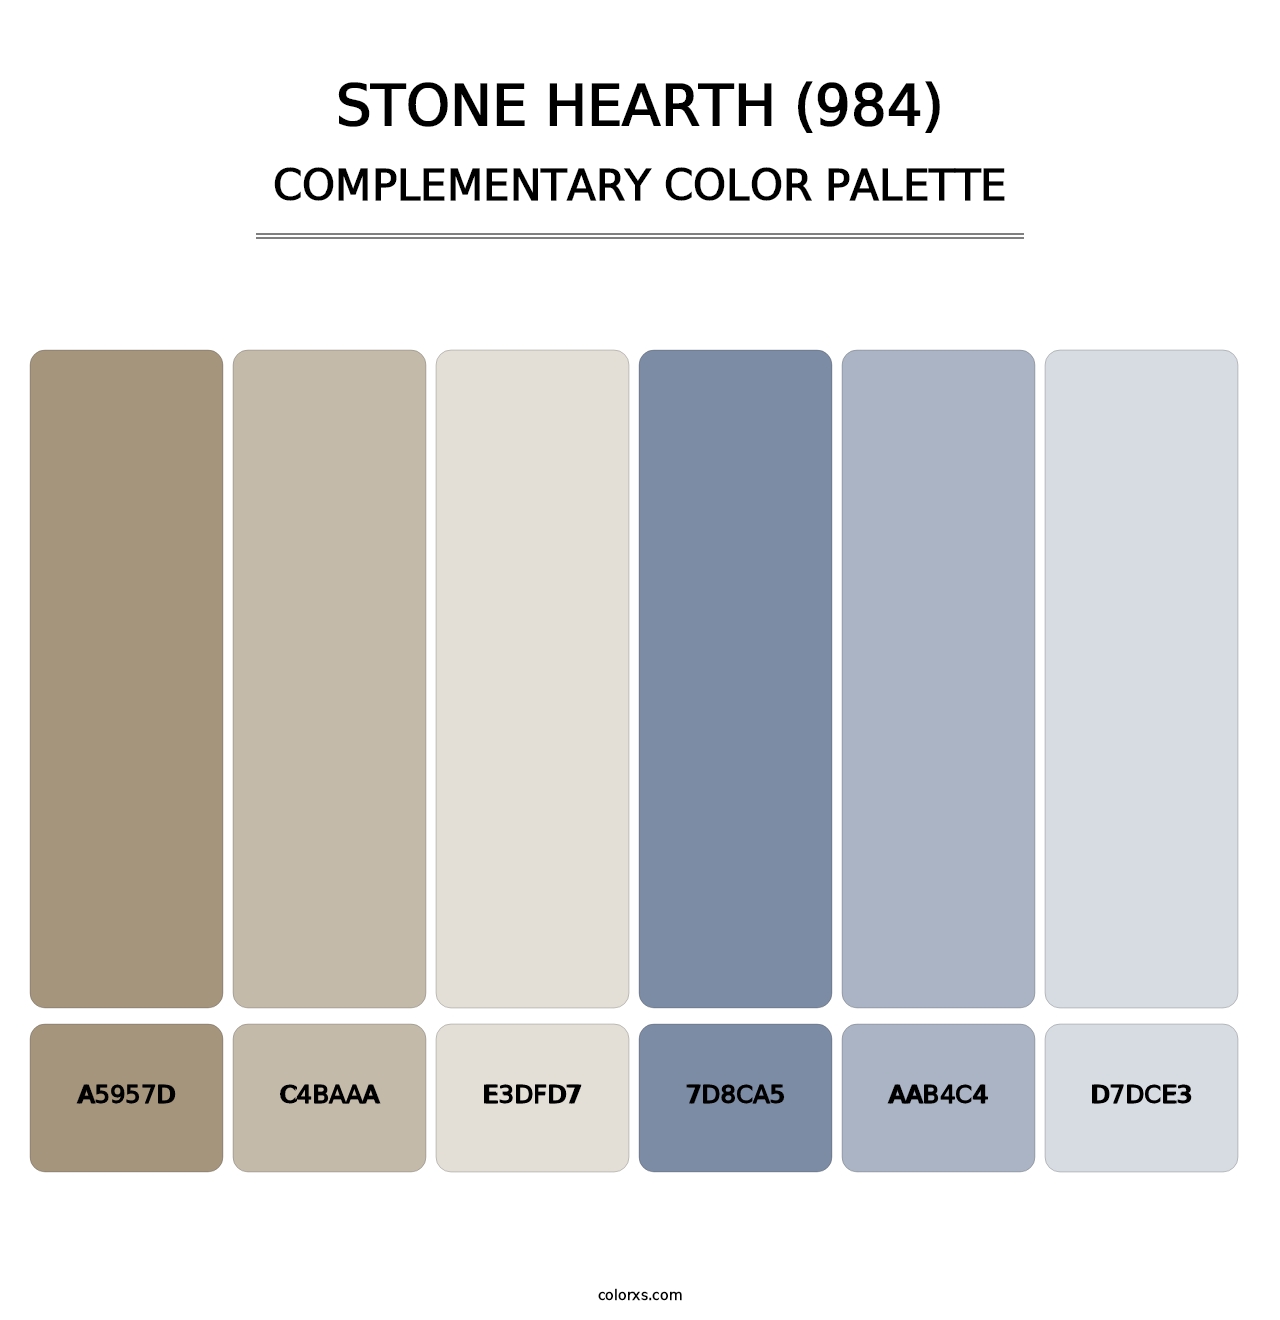 Stone Hearth (984) - Complementary Color Palette